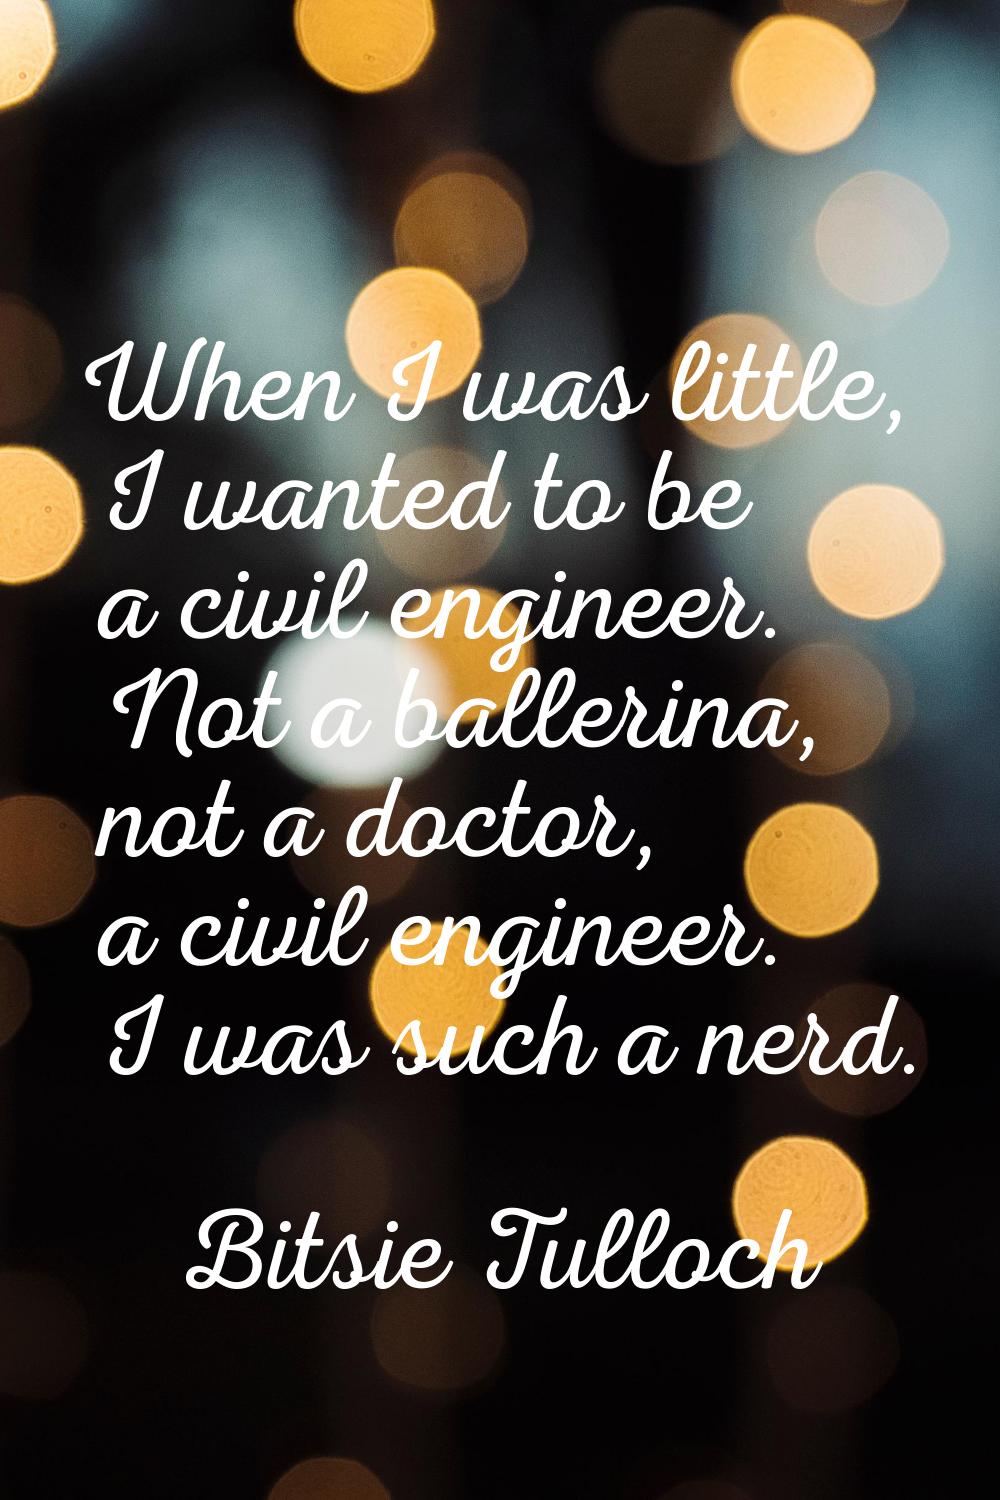 When I was little, I wanted to be a civil engineer. Not a ballerina, not a doctor, a civil engineer